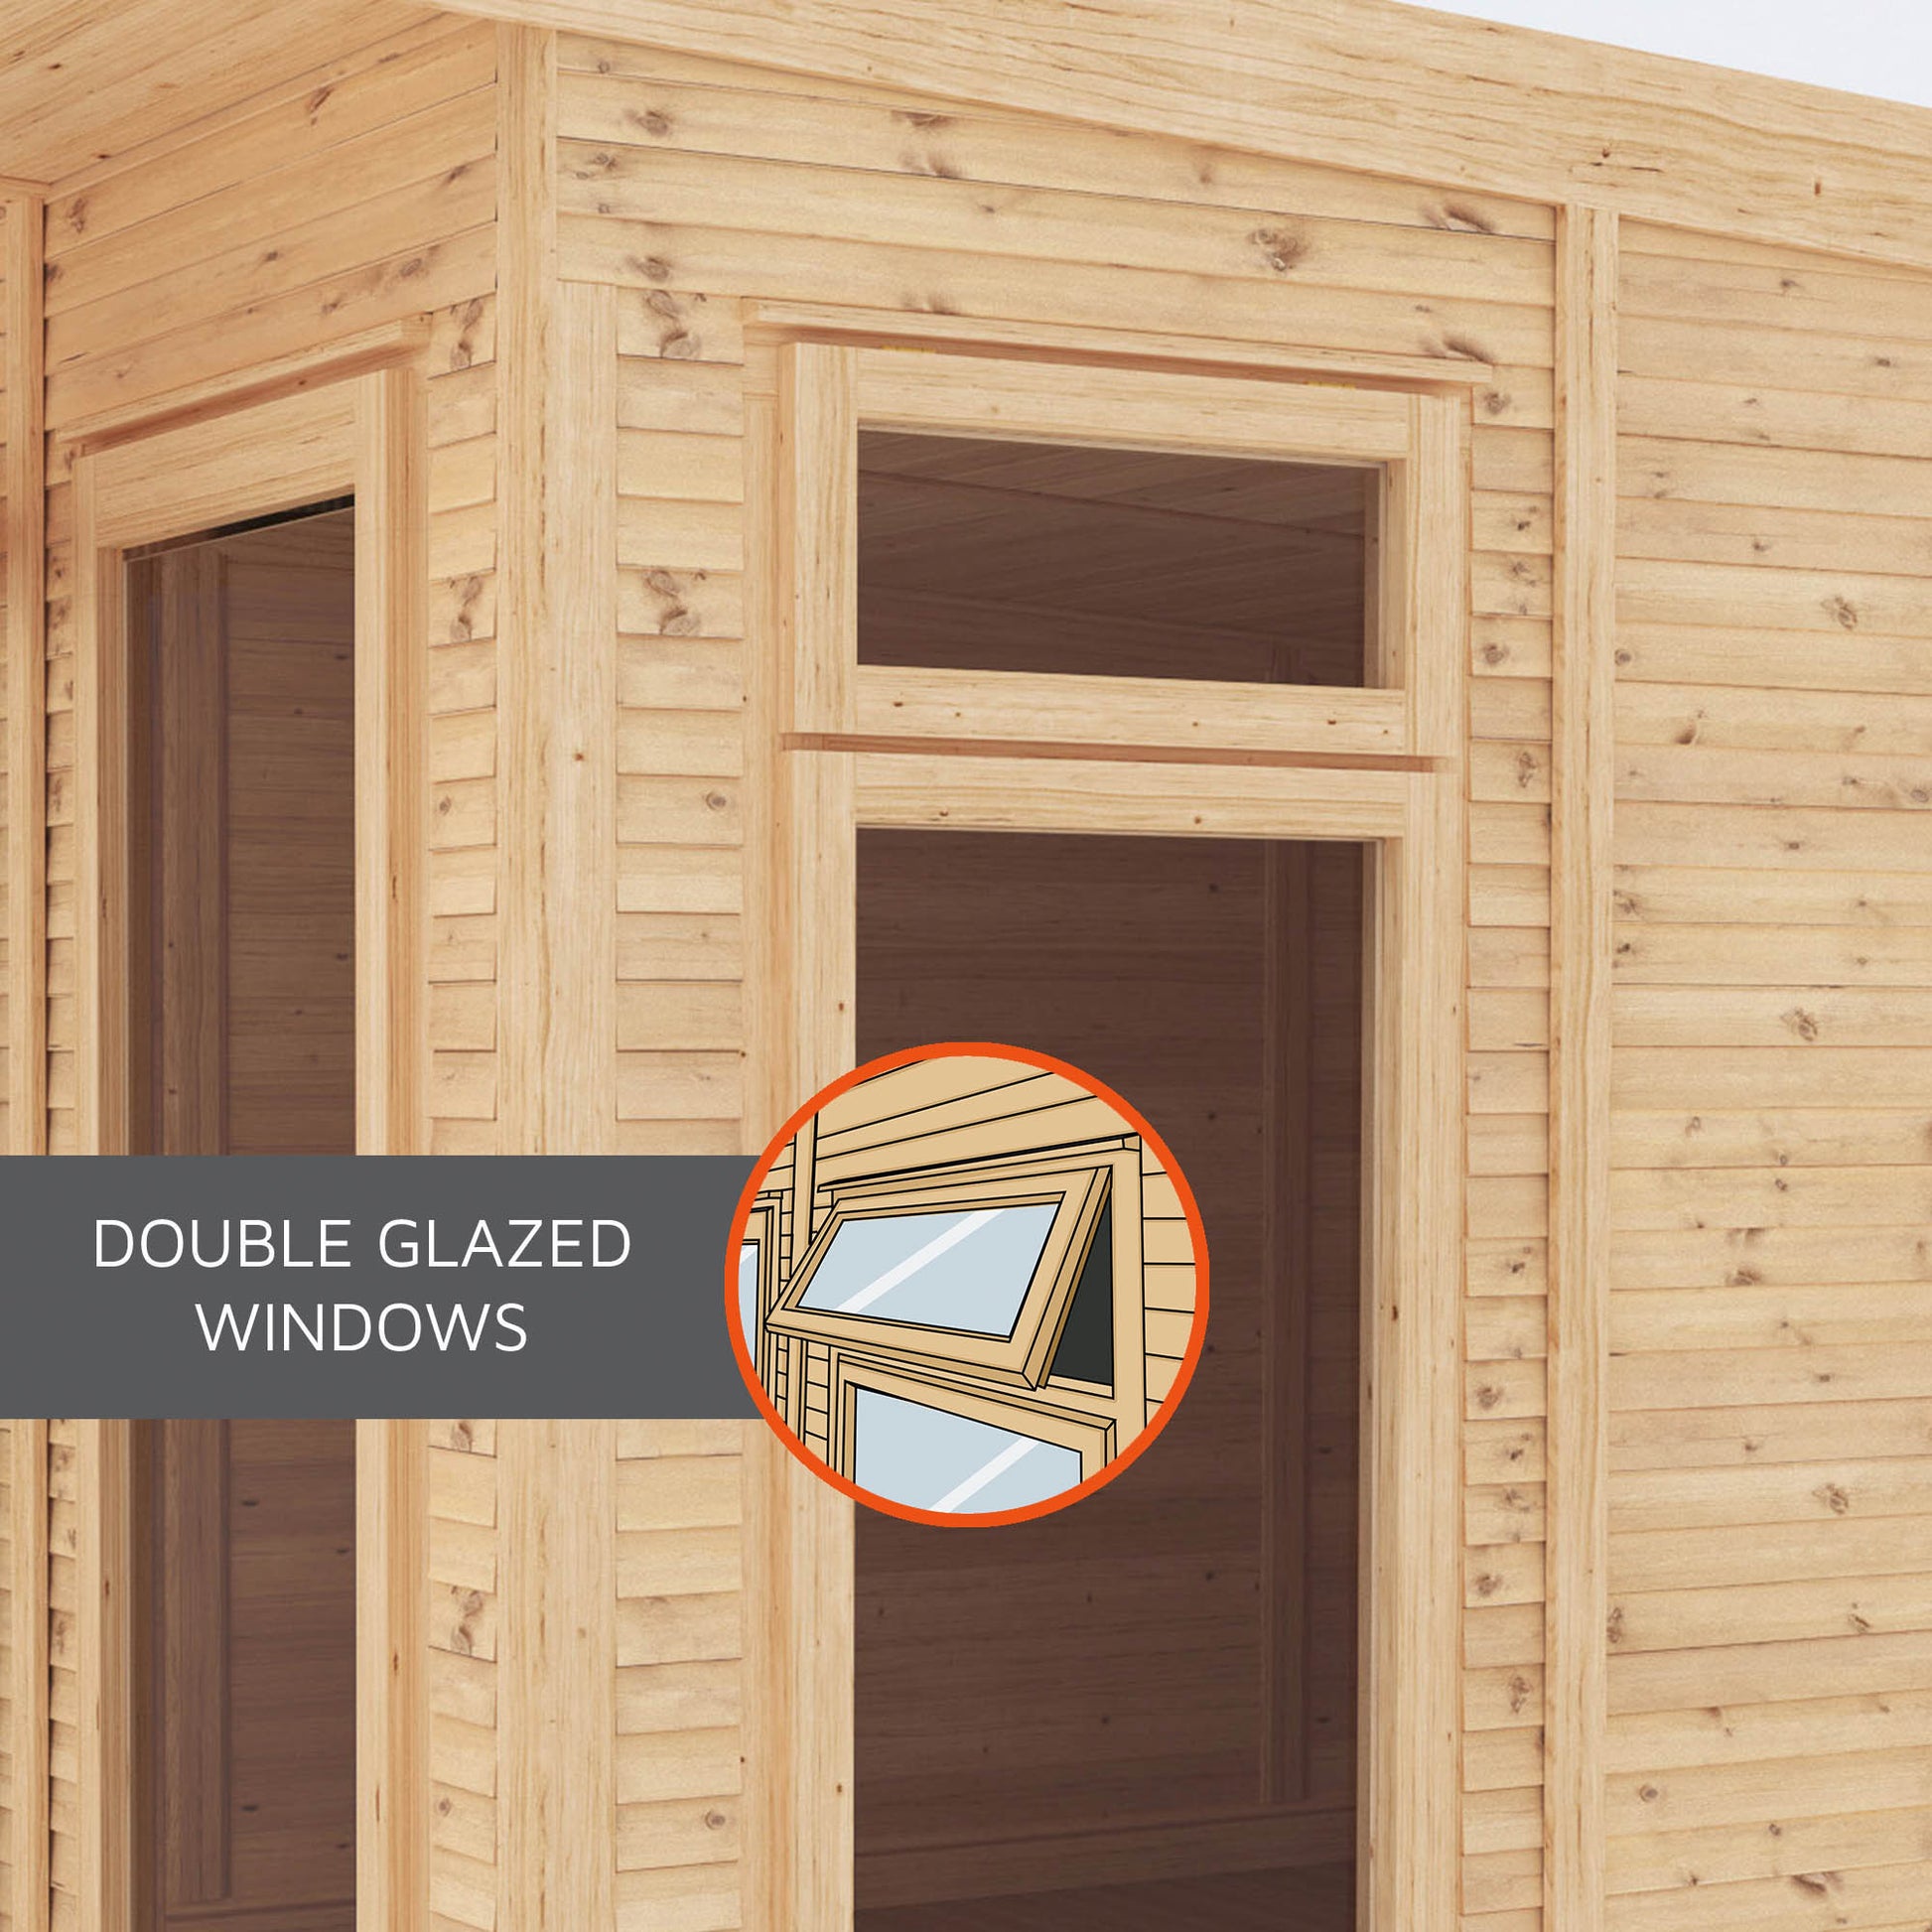 Double glazed windows on a timber insulated garden room